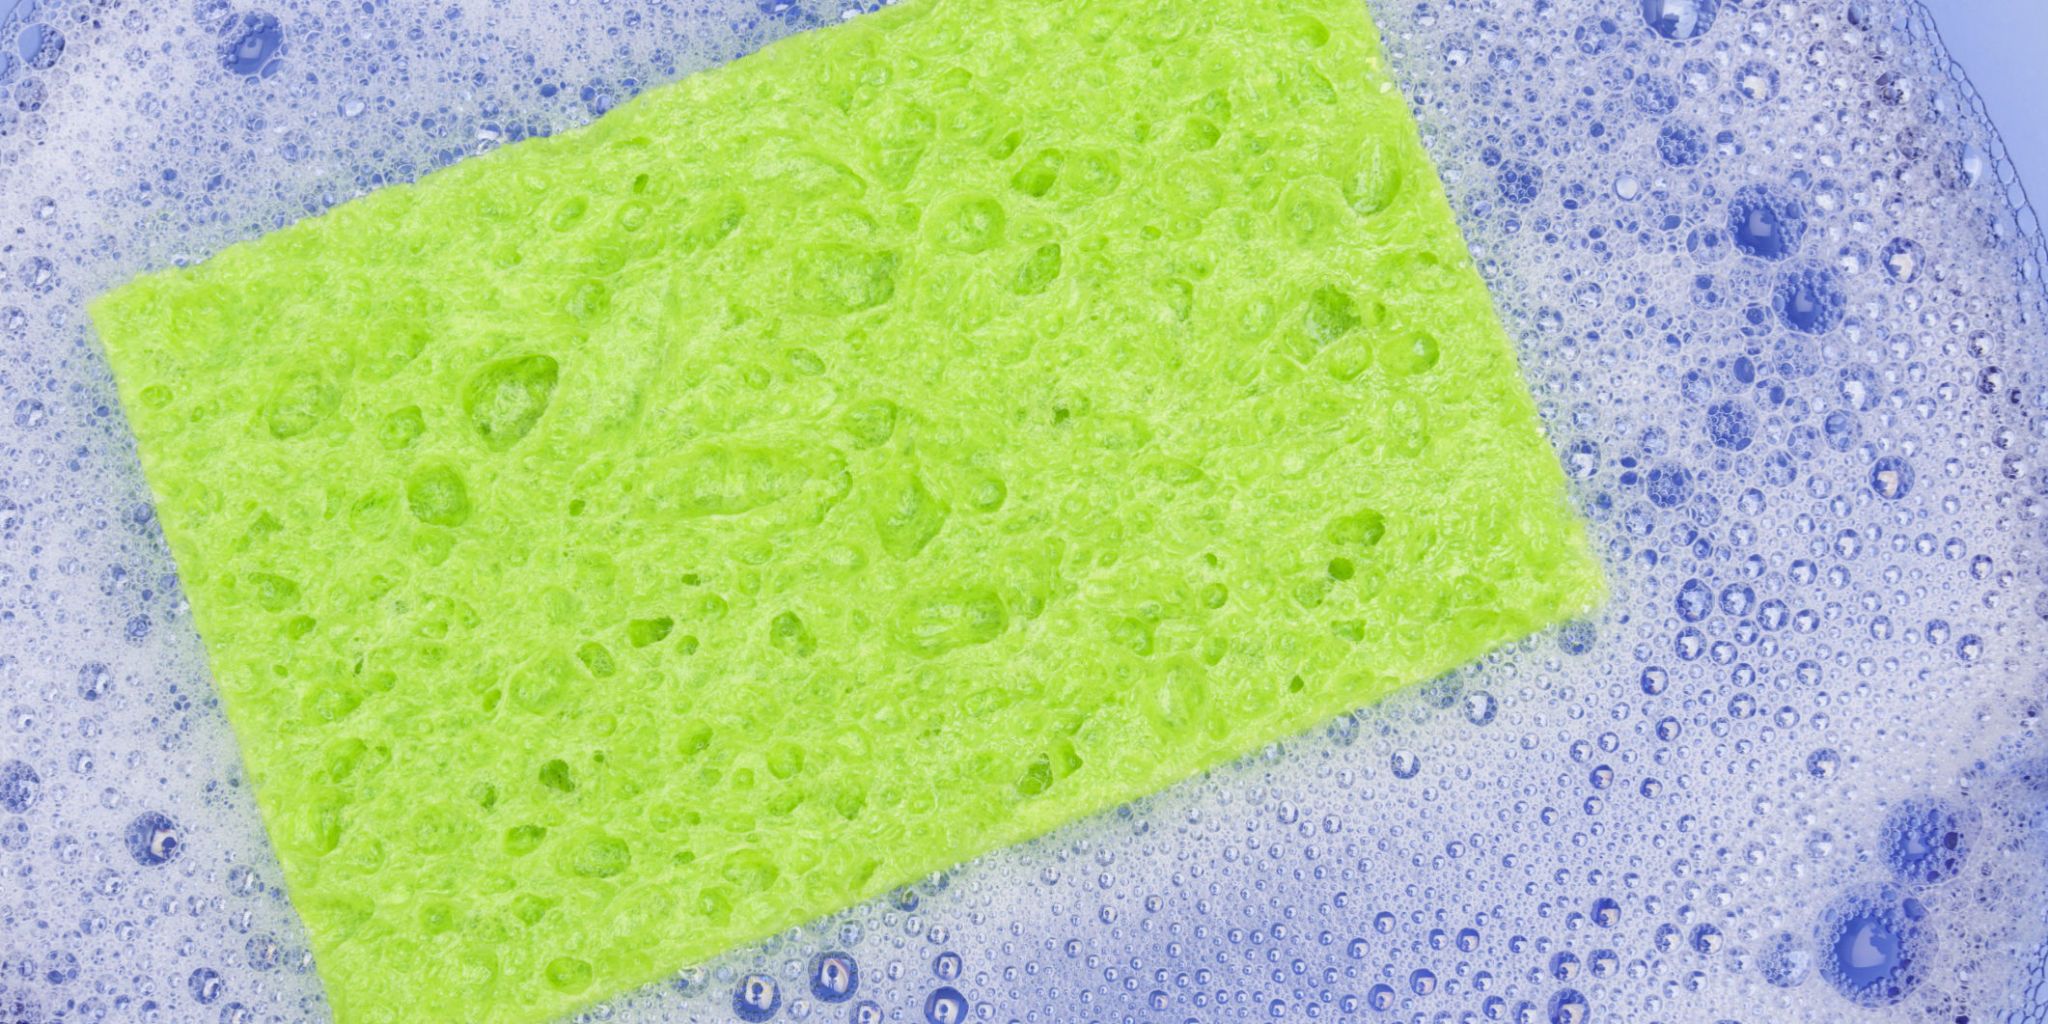 how to clean makeup sponges with vinegar